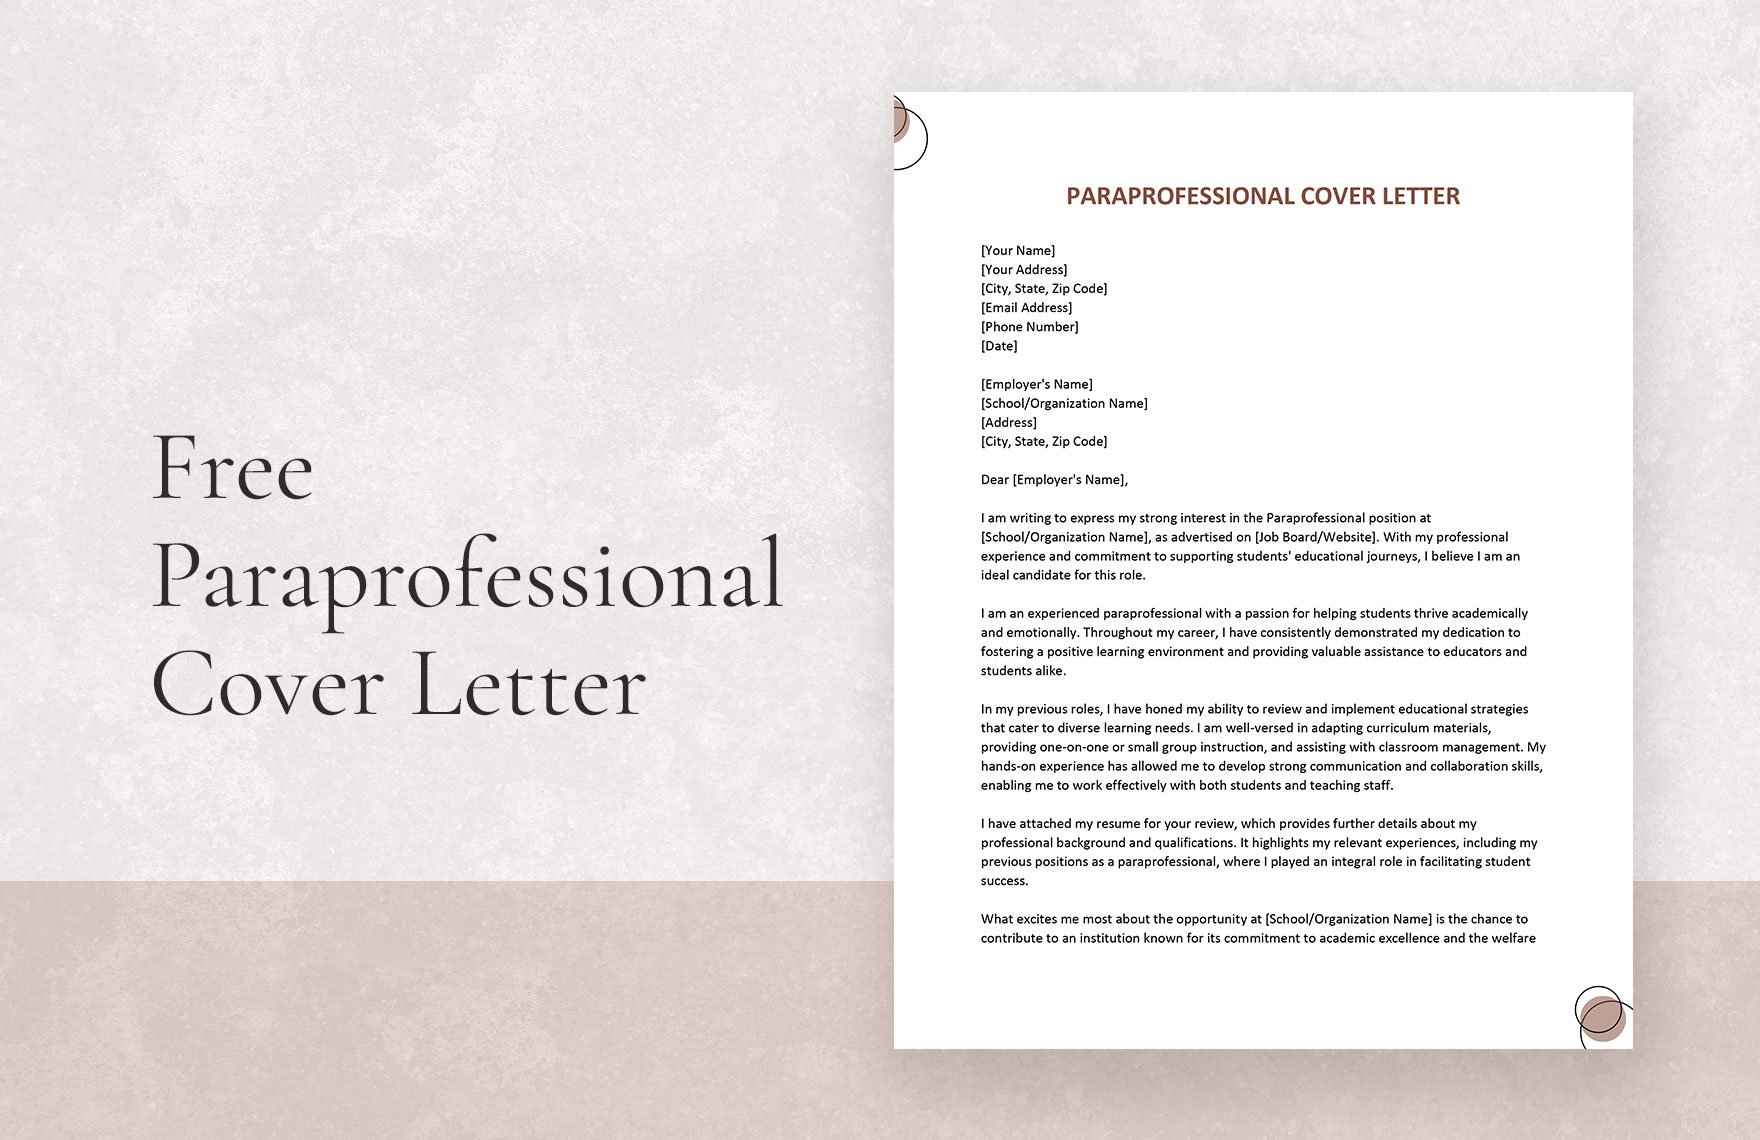 Paraprofessional Cover Letter in Word, Google Docs, Apple Pages